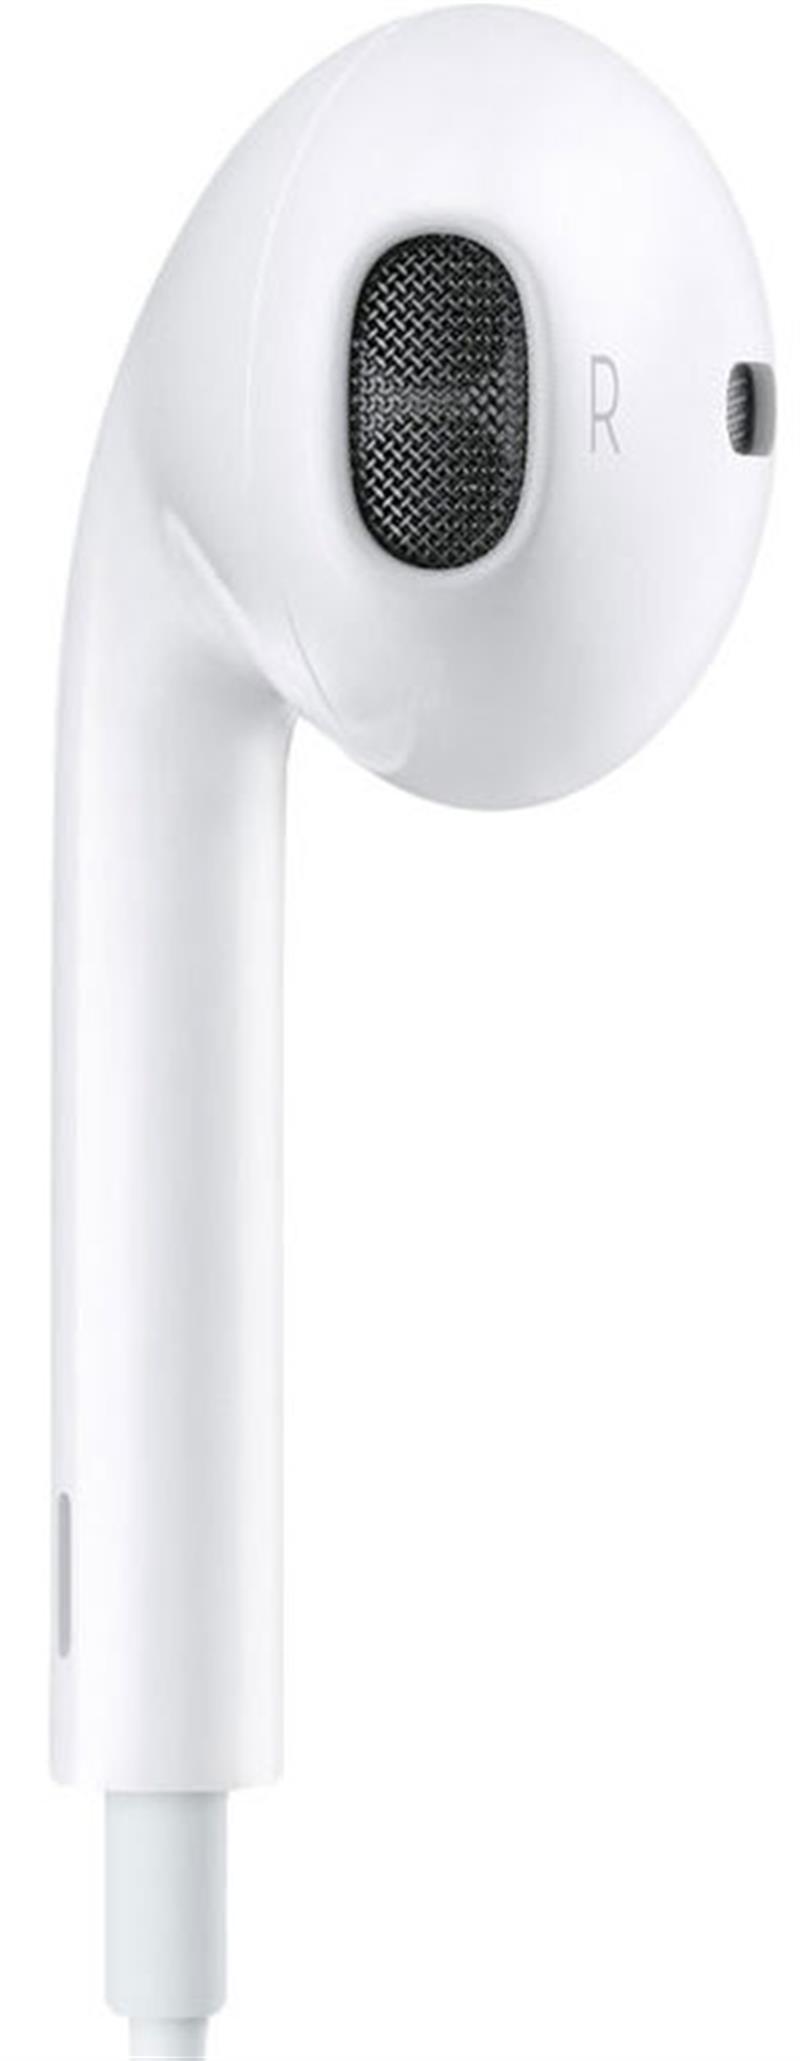  Apple EarPods with Remote and Mic White